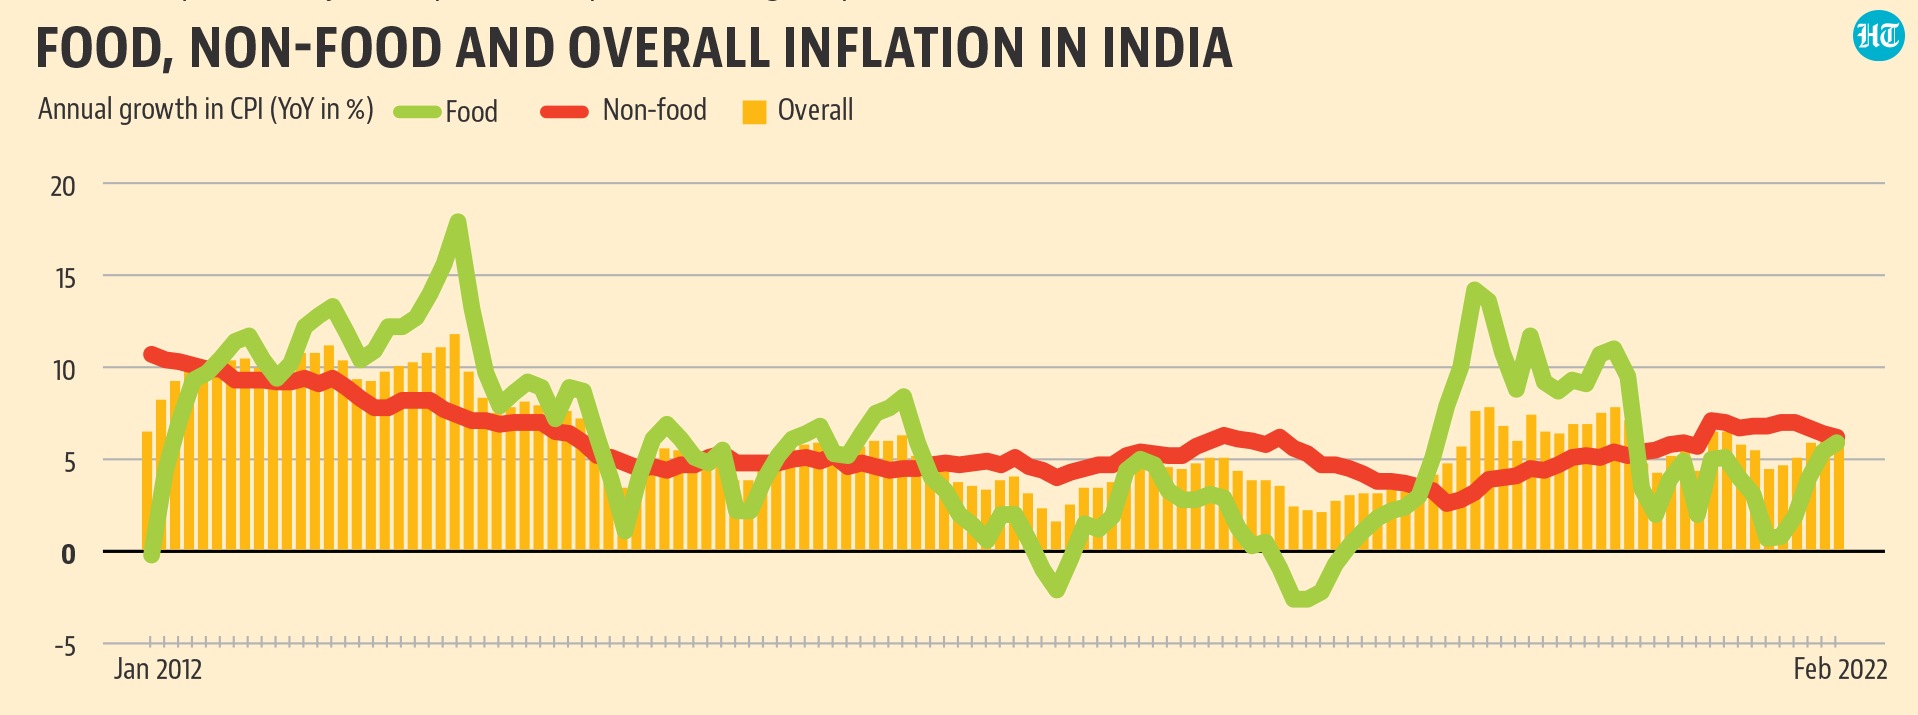 India’s double-digit inflation phase in the first half of the last decade was largely a result of a surge in food inflation, as overall inflation kept increasing even though non-food inflation was actually coming down.